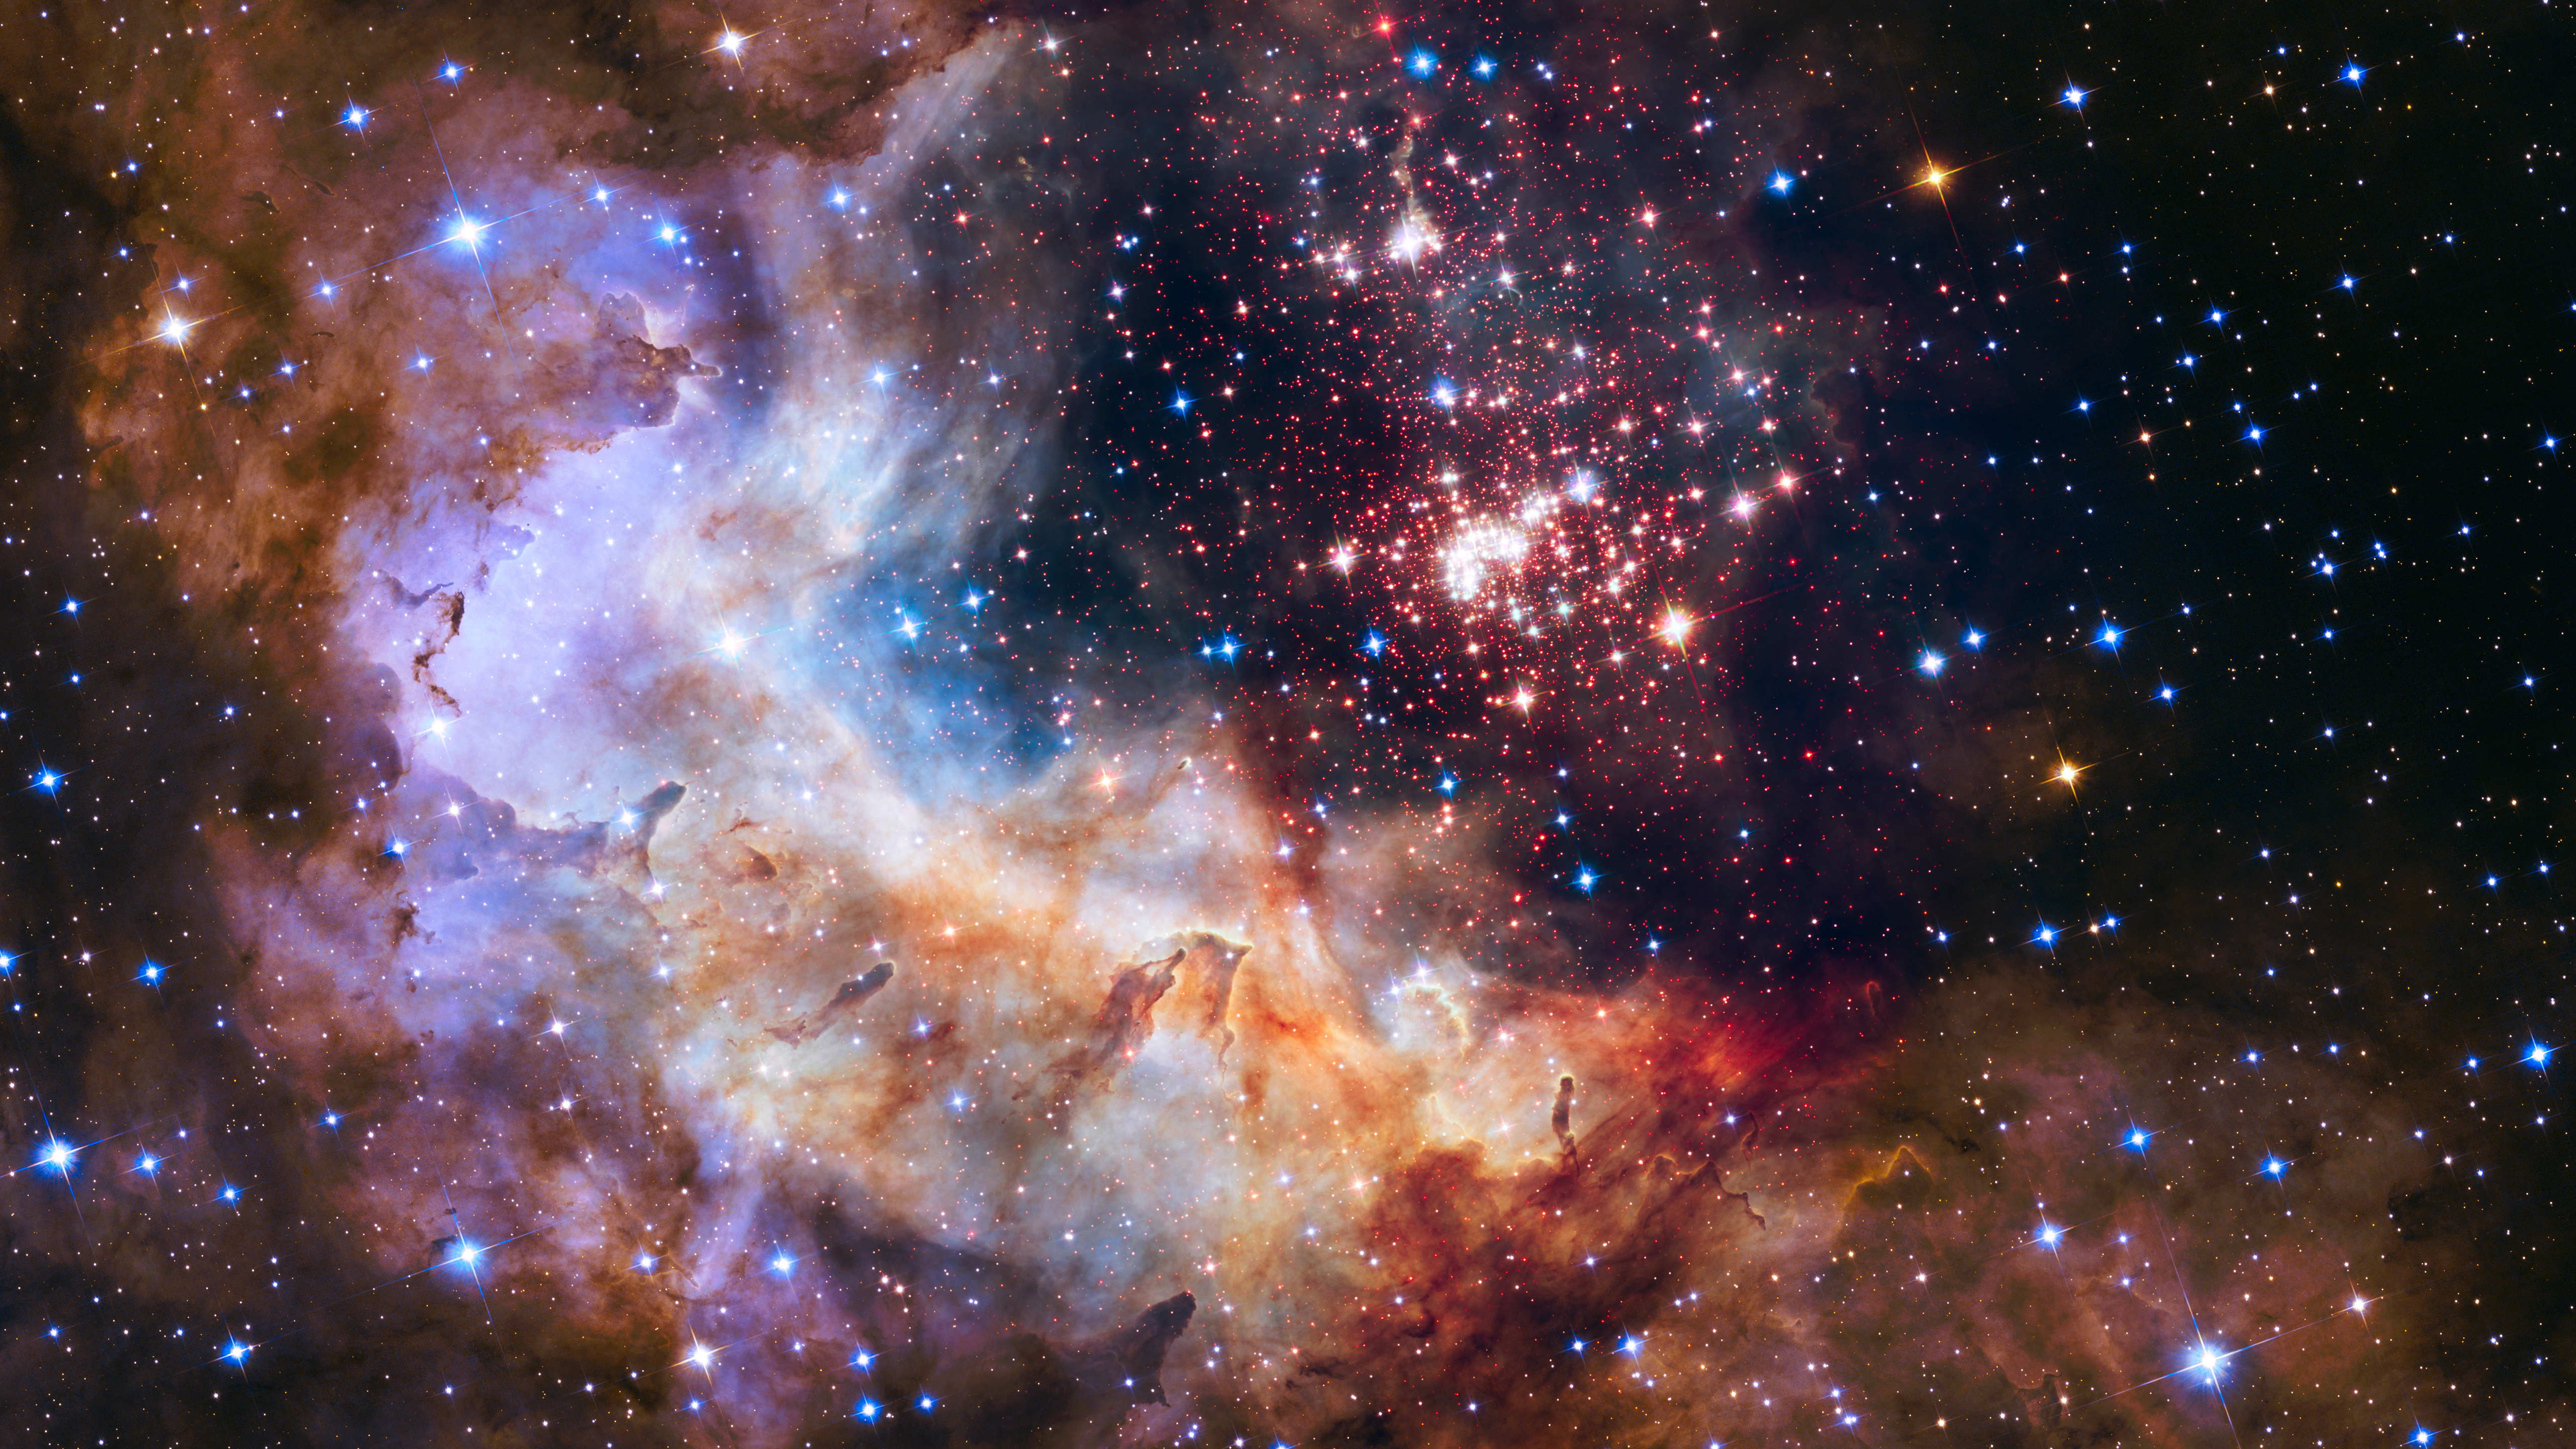 NASA Unveils Celestial Fireworks as Official Hubble 25th Anniversary Image